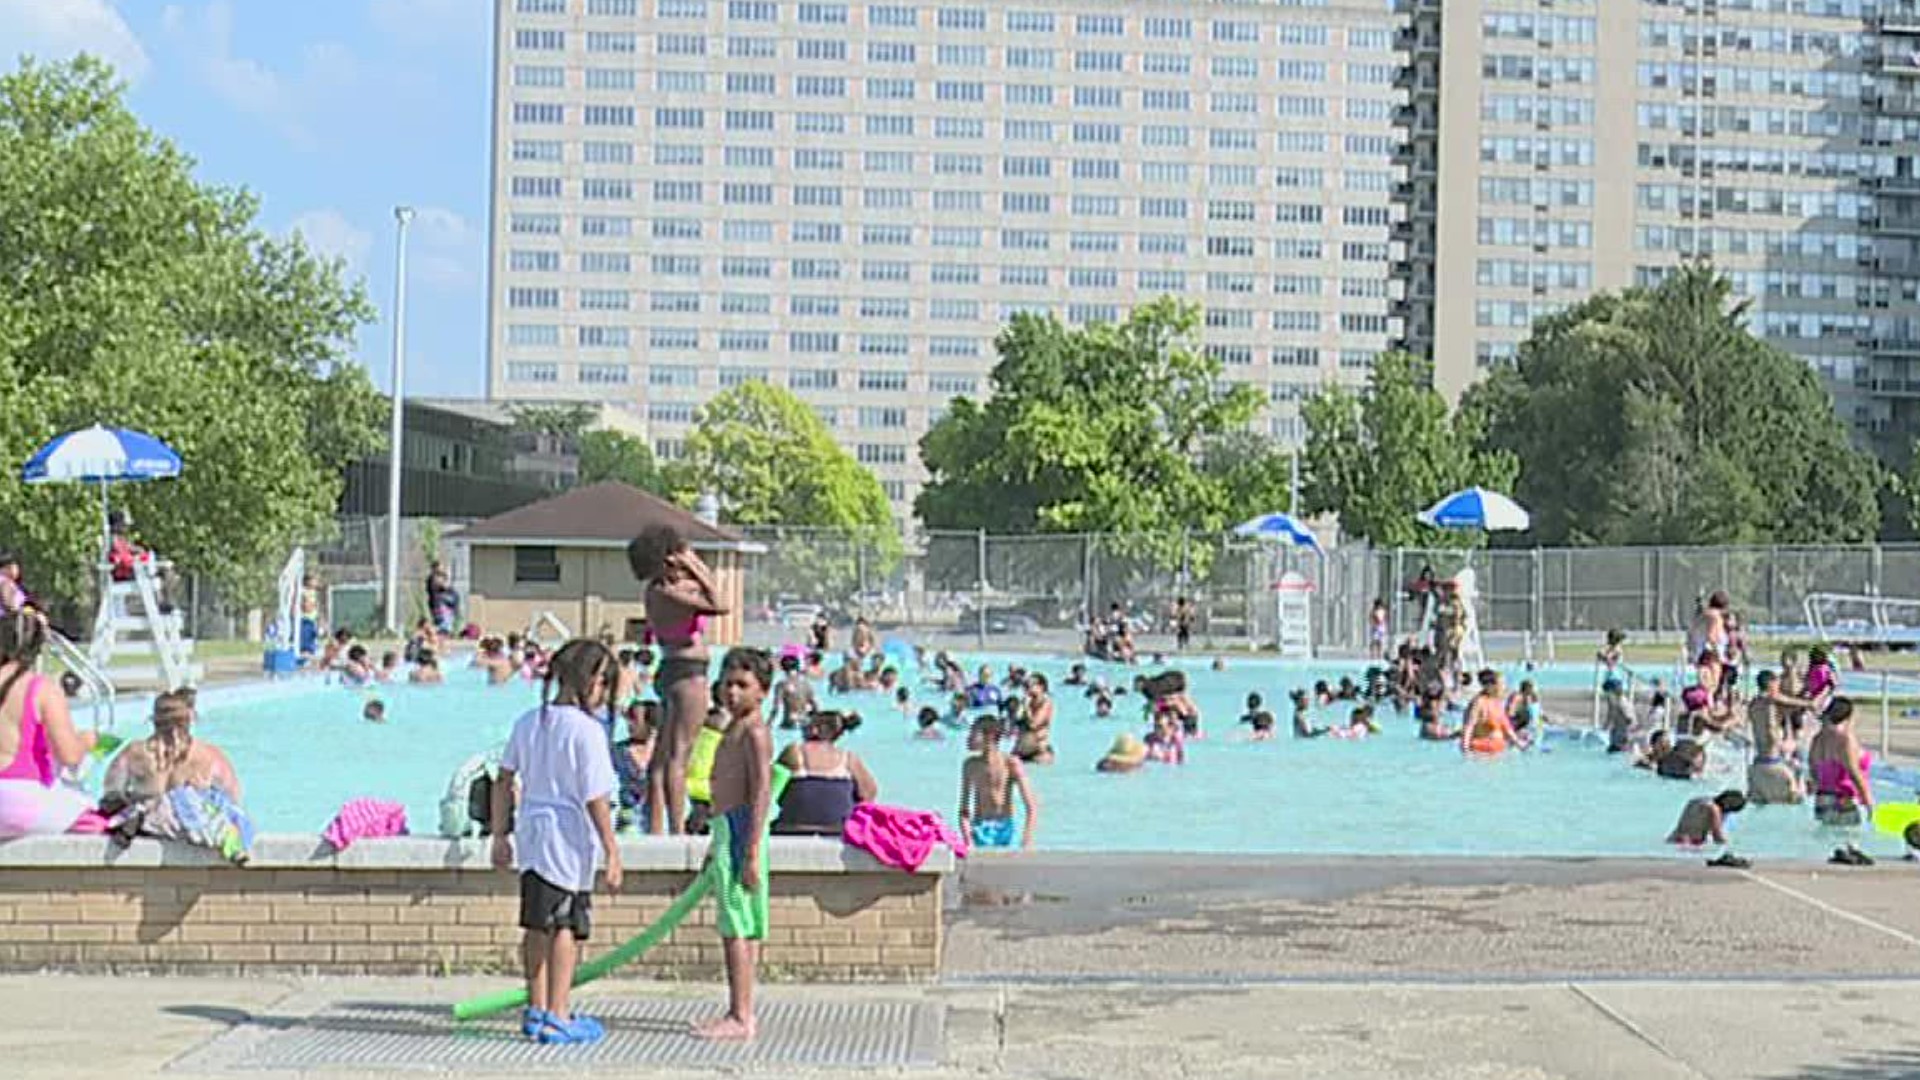 A number of people came out to the Jackson Lick Pool, located at 1201 N. 6th Street. The pool is open daily, Tuesday through Sunday, from 12 p.m. to 6 p.m.